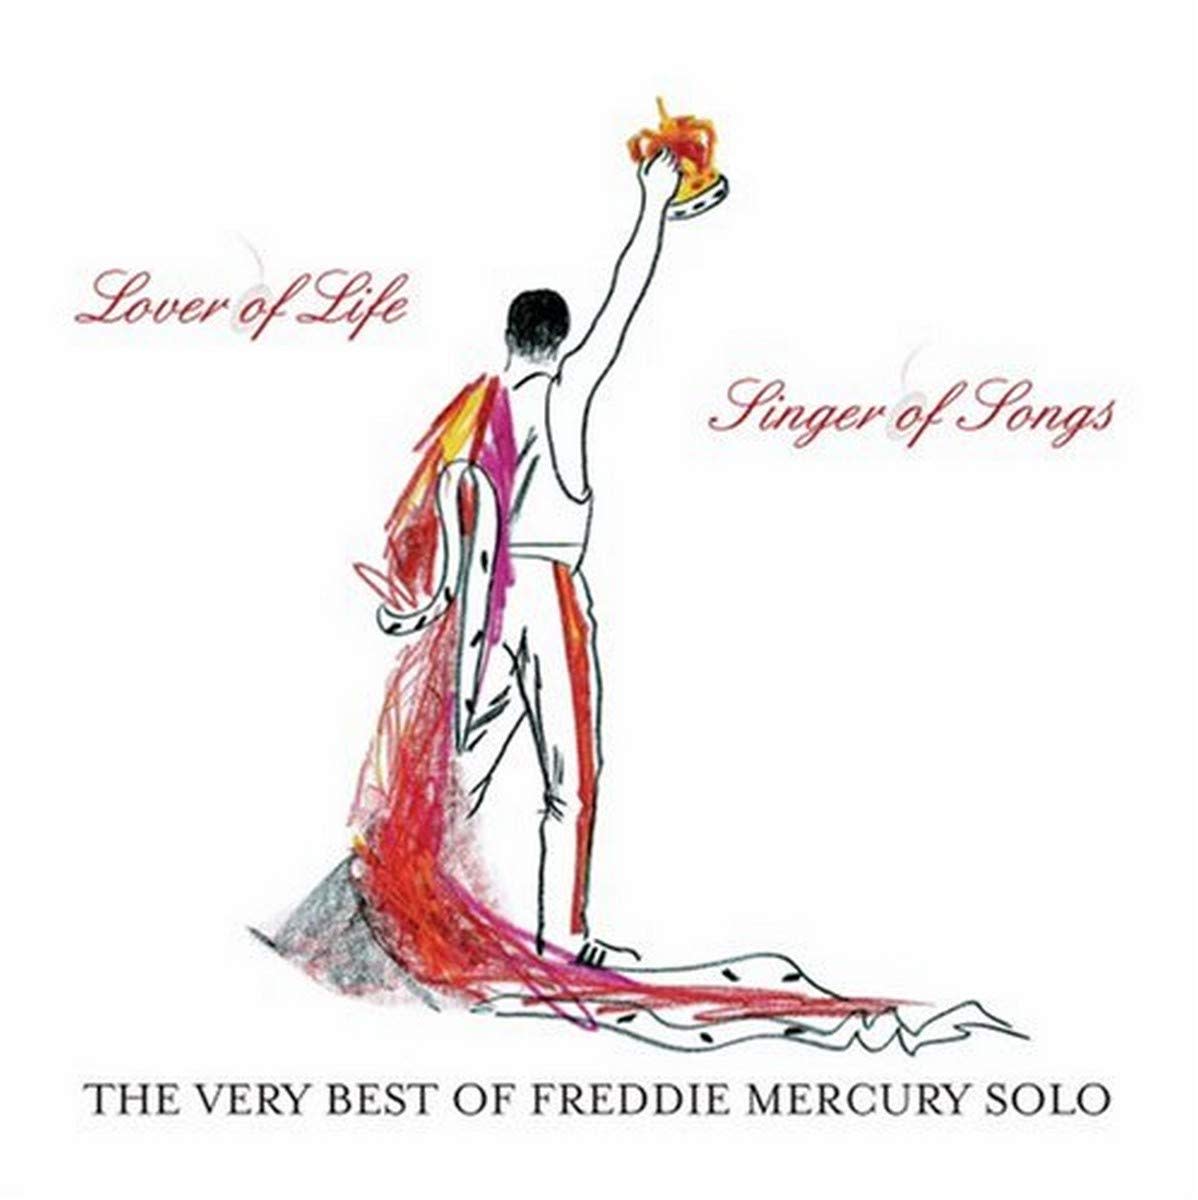 "Lover of Life, Singer of Songs," a 2006 compilation released in the U.K. to coincide with Freddie Mercury's 60th birthday.